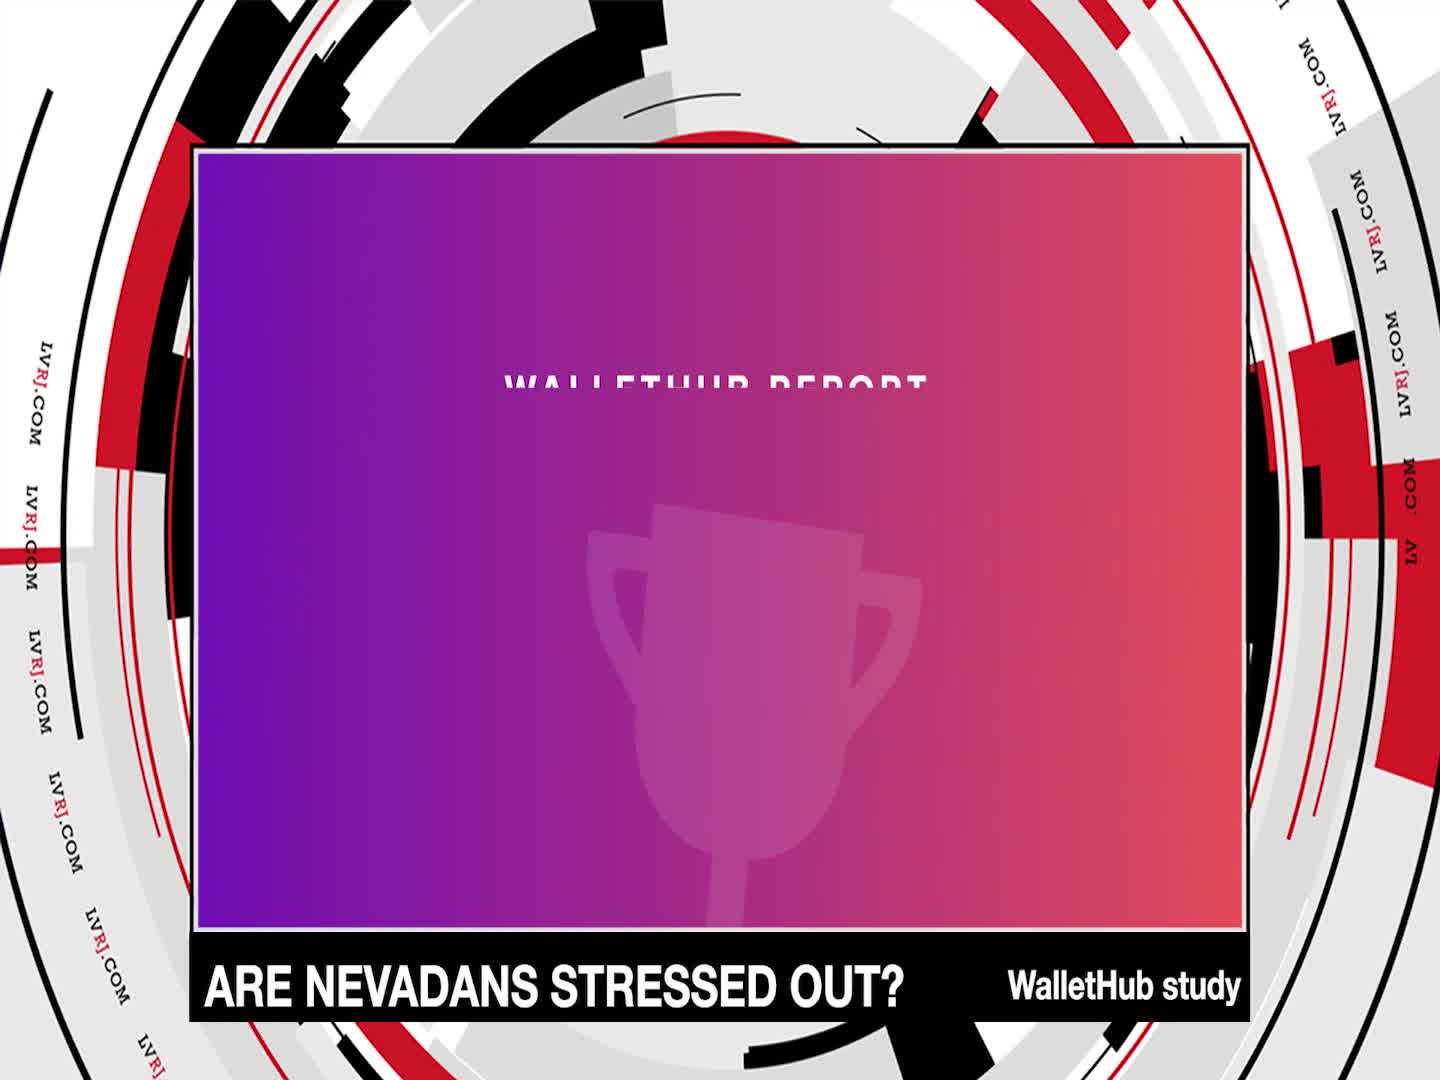 Are Nevadans Stressed Out?